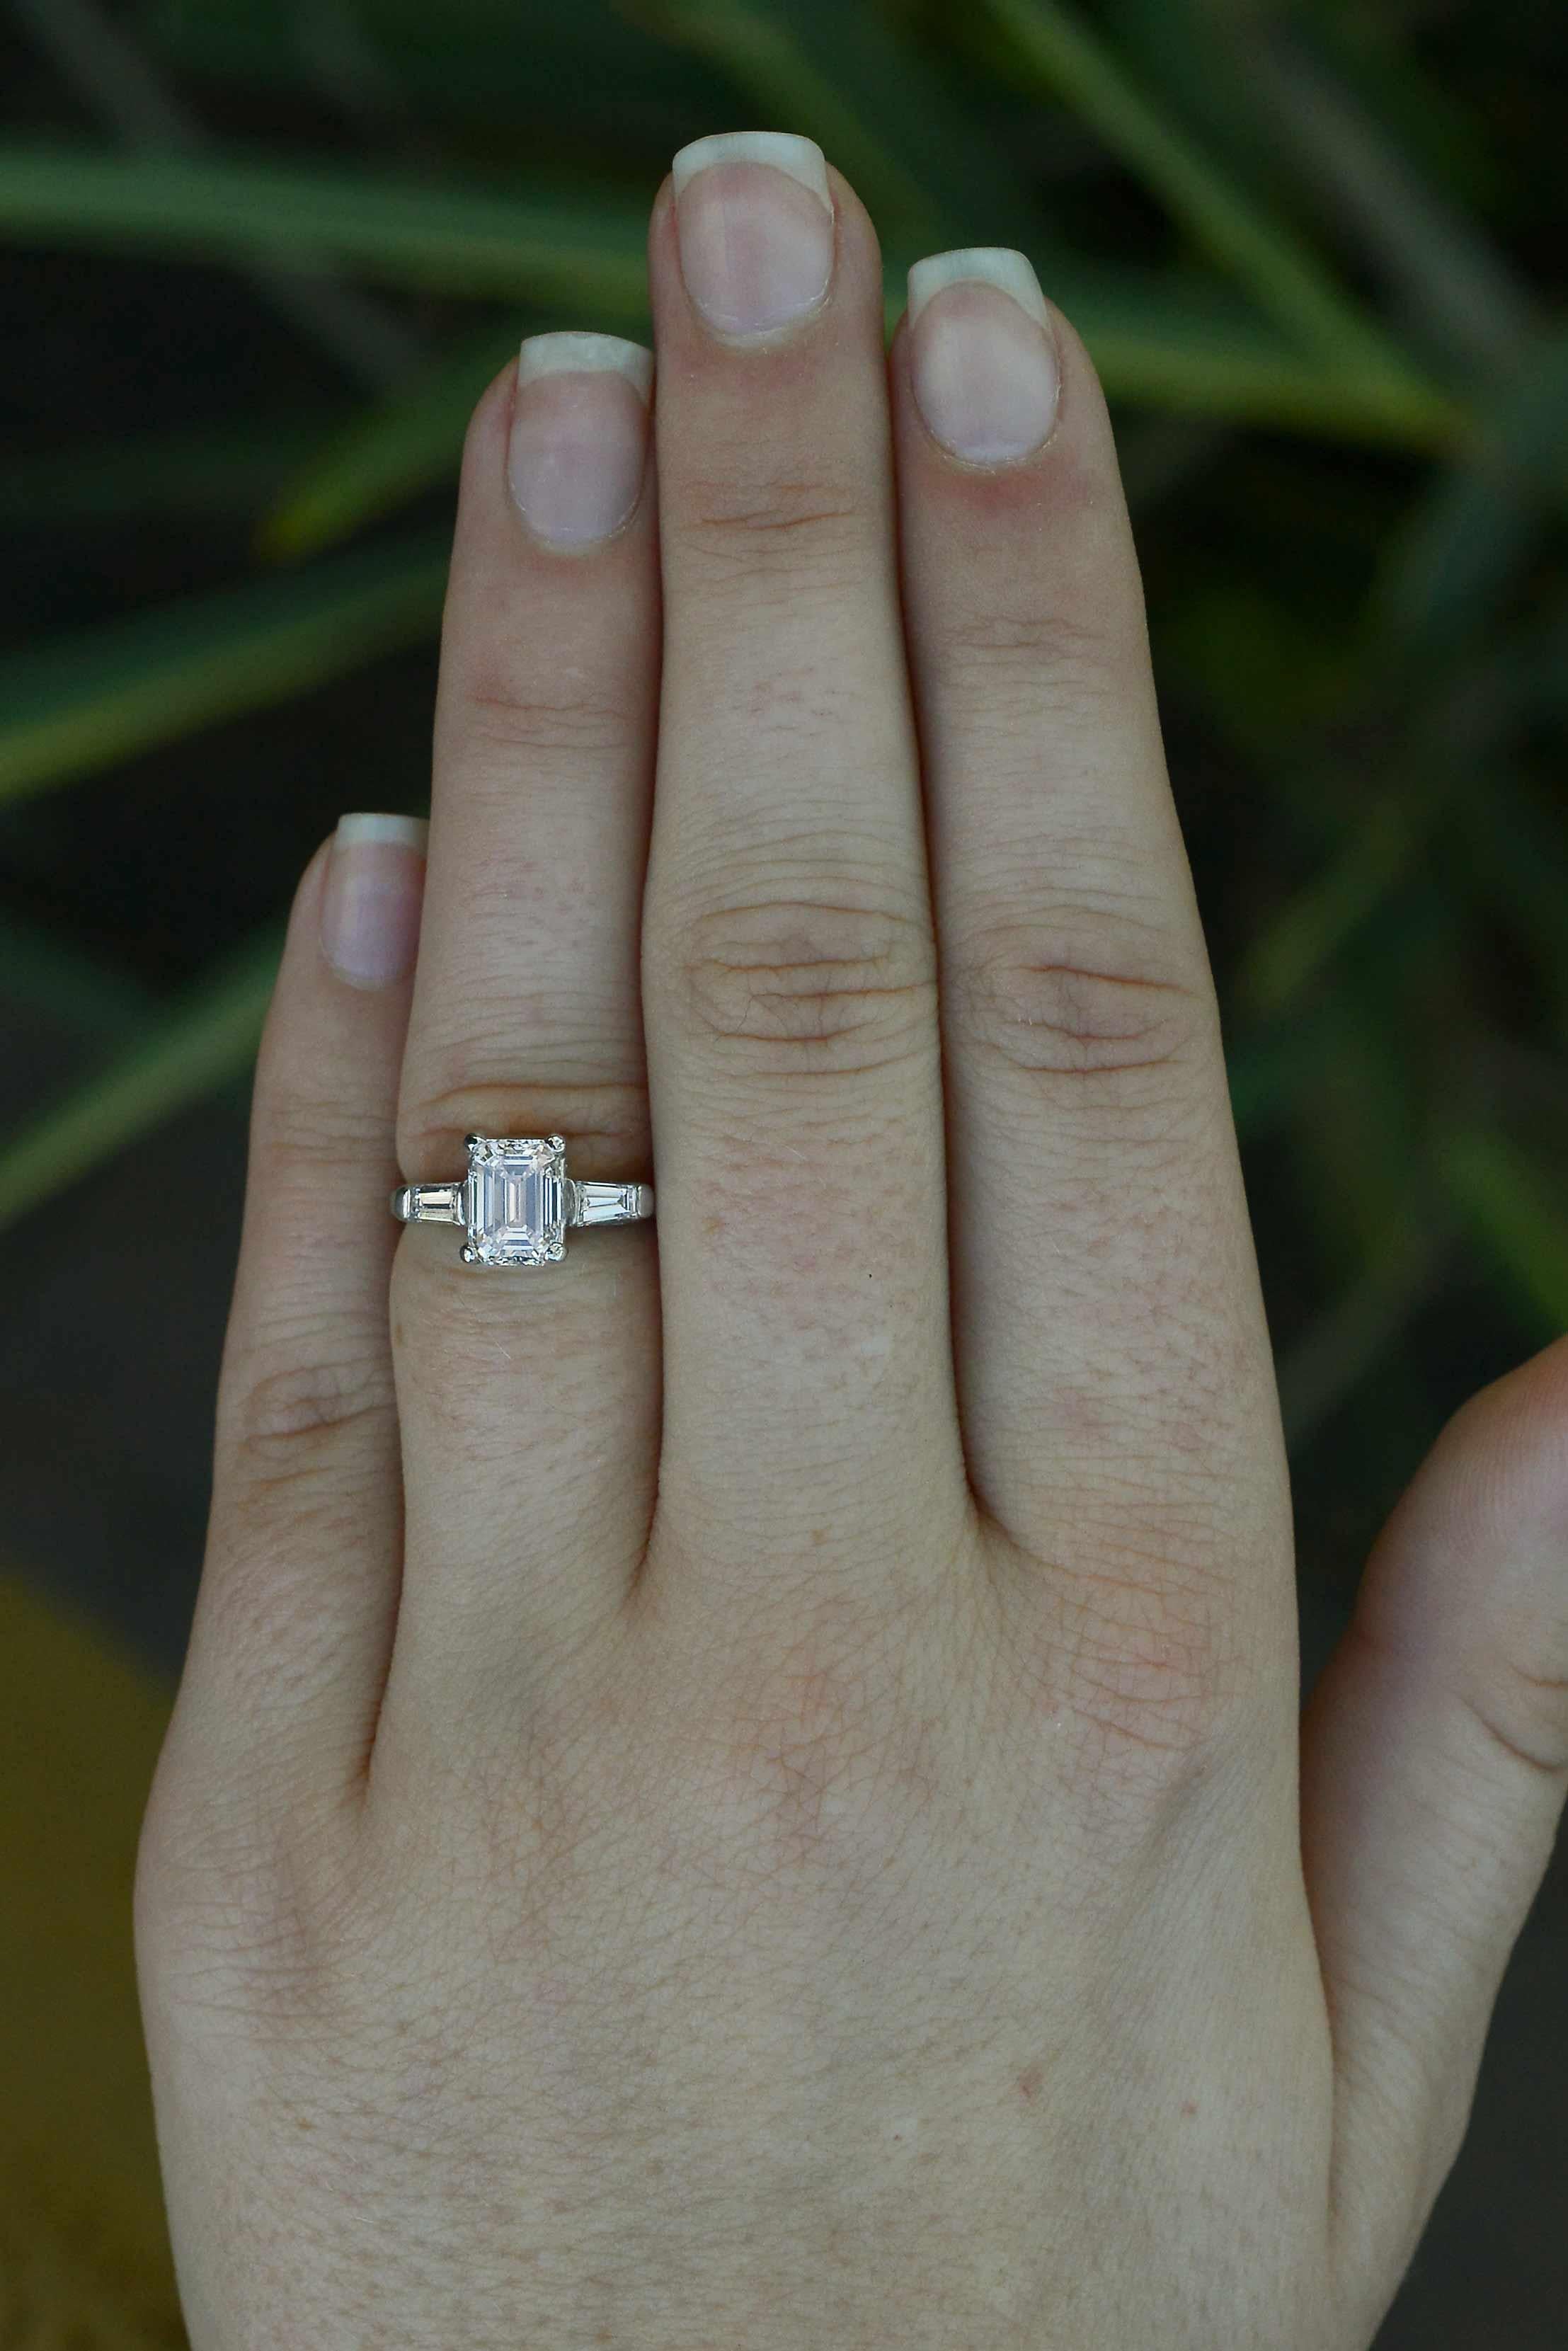 A subtle yet entrancing 3 stone Art Deco antique engagement ring, styled after Tiffany & Co. centered by a GIA certified 1.50 carat emerald cut diamond showing near flawless clarity and excellent symmetry. Graced with a scintillating near-colorless